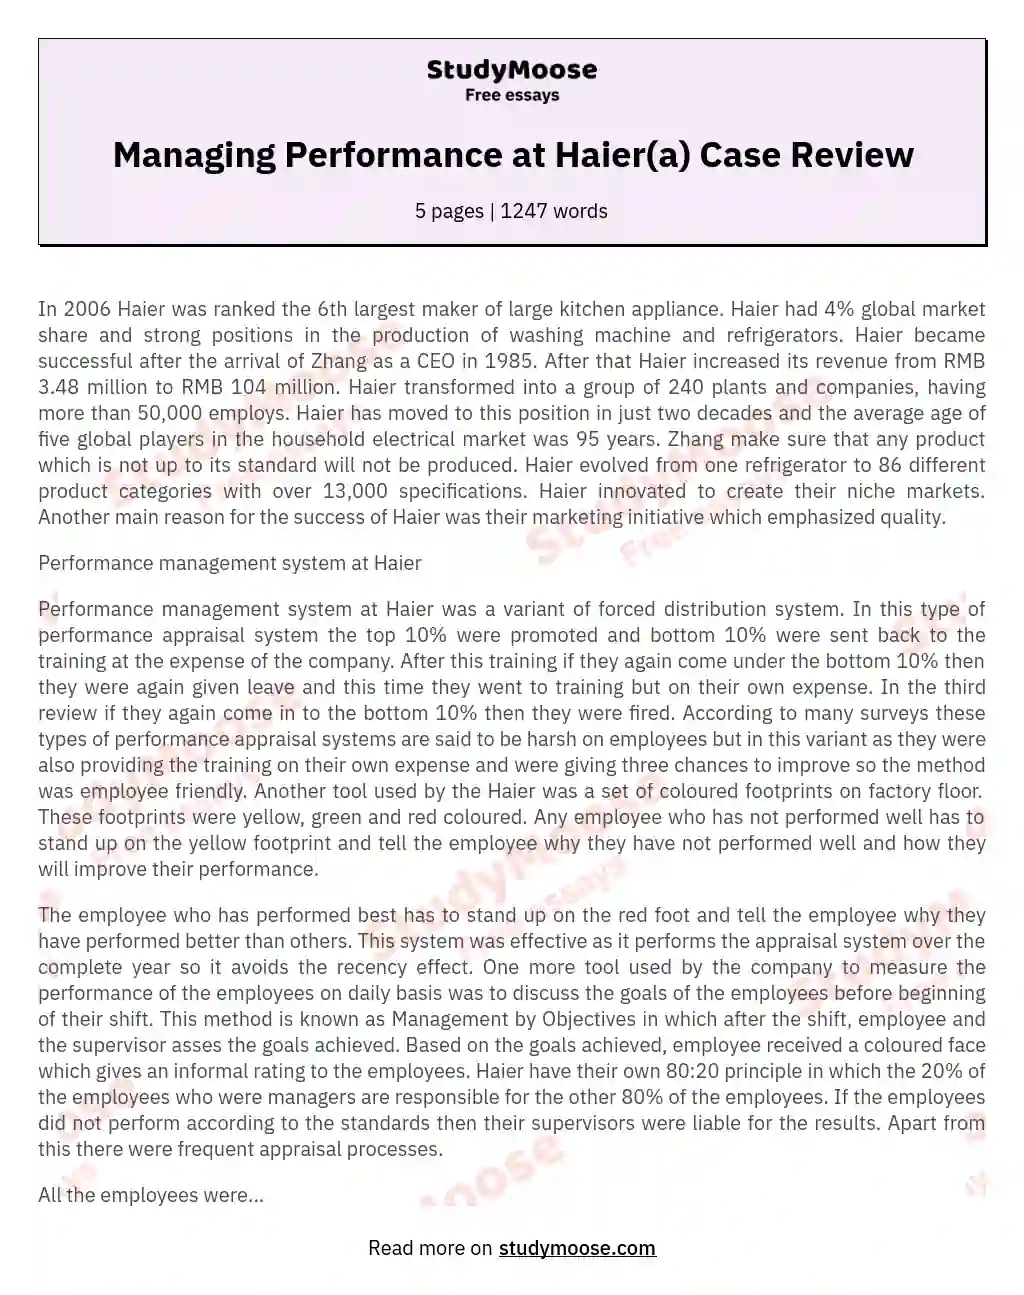 Managing Performance at Haier(a) Case Review essay